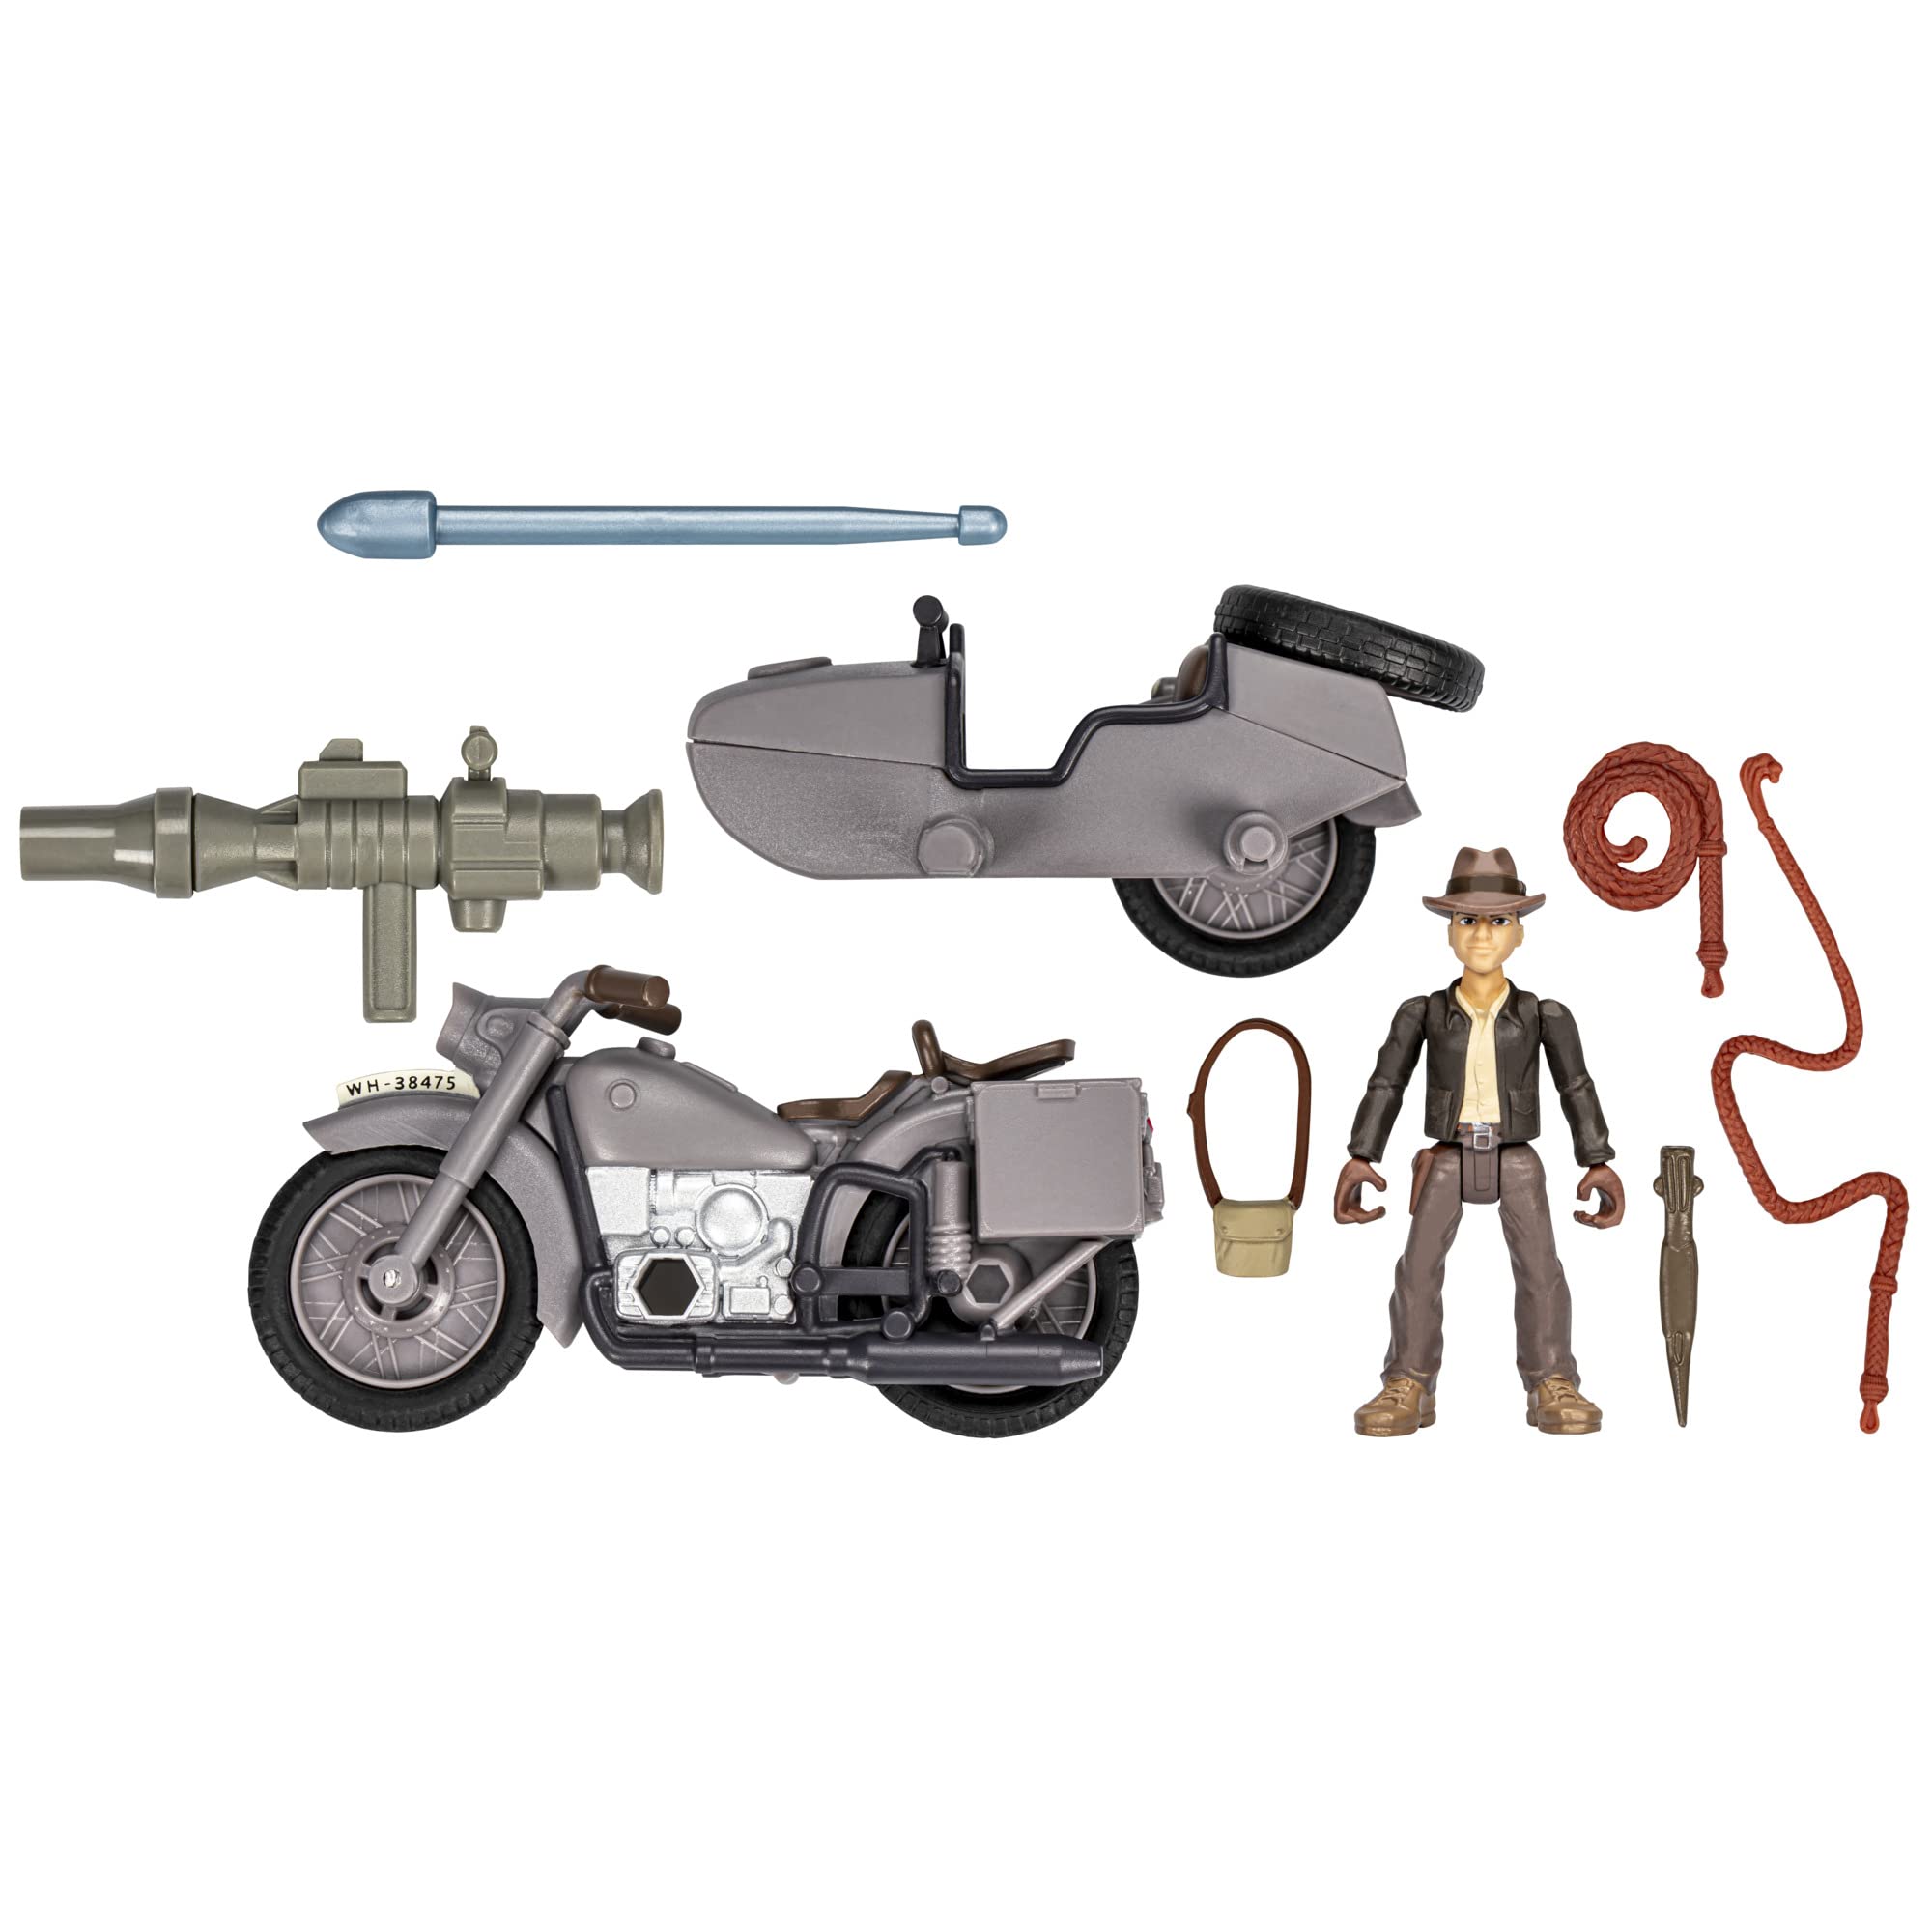 Indiana Jones Hasbro Worlds of Adventure with Motorcycle and Sidecar Action Figure Set, 2.5-inch, Action Figures, Ages 4 and Up